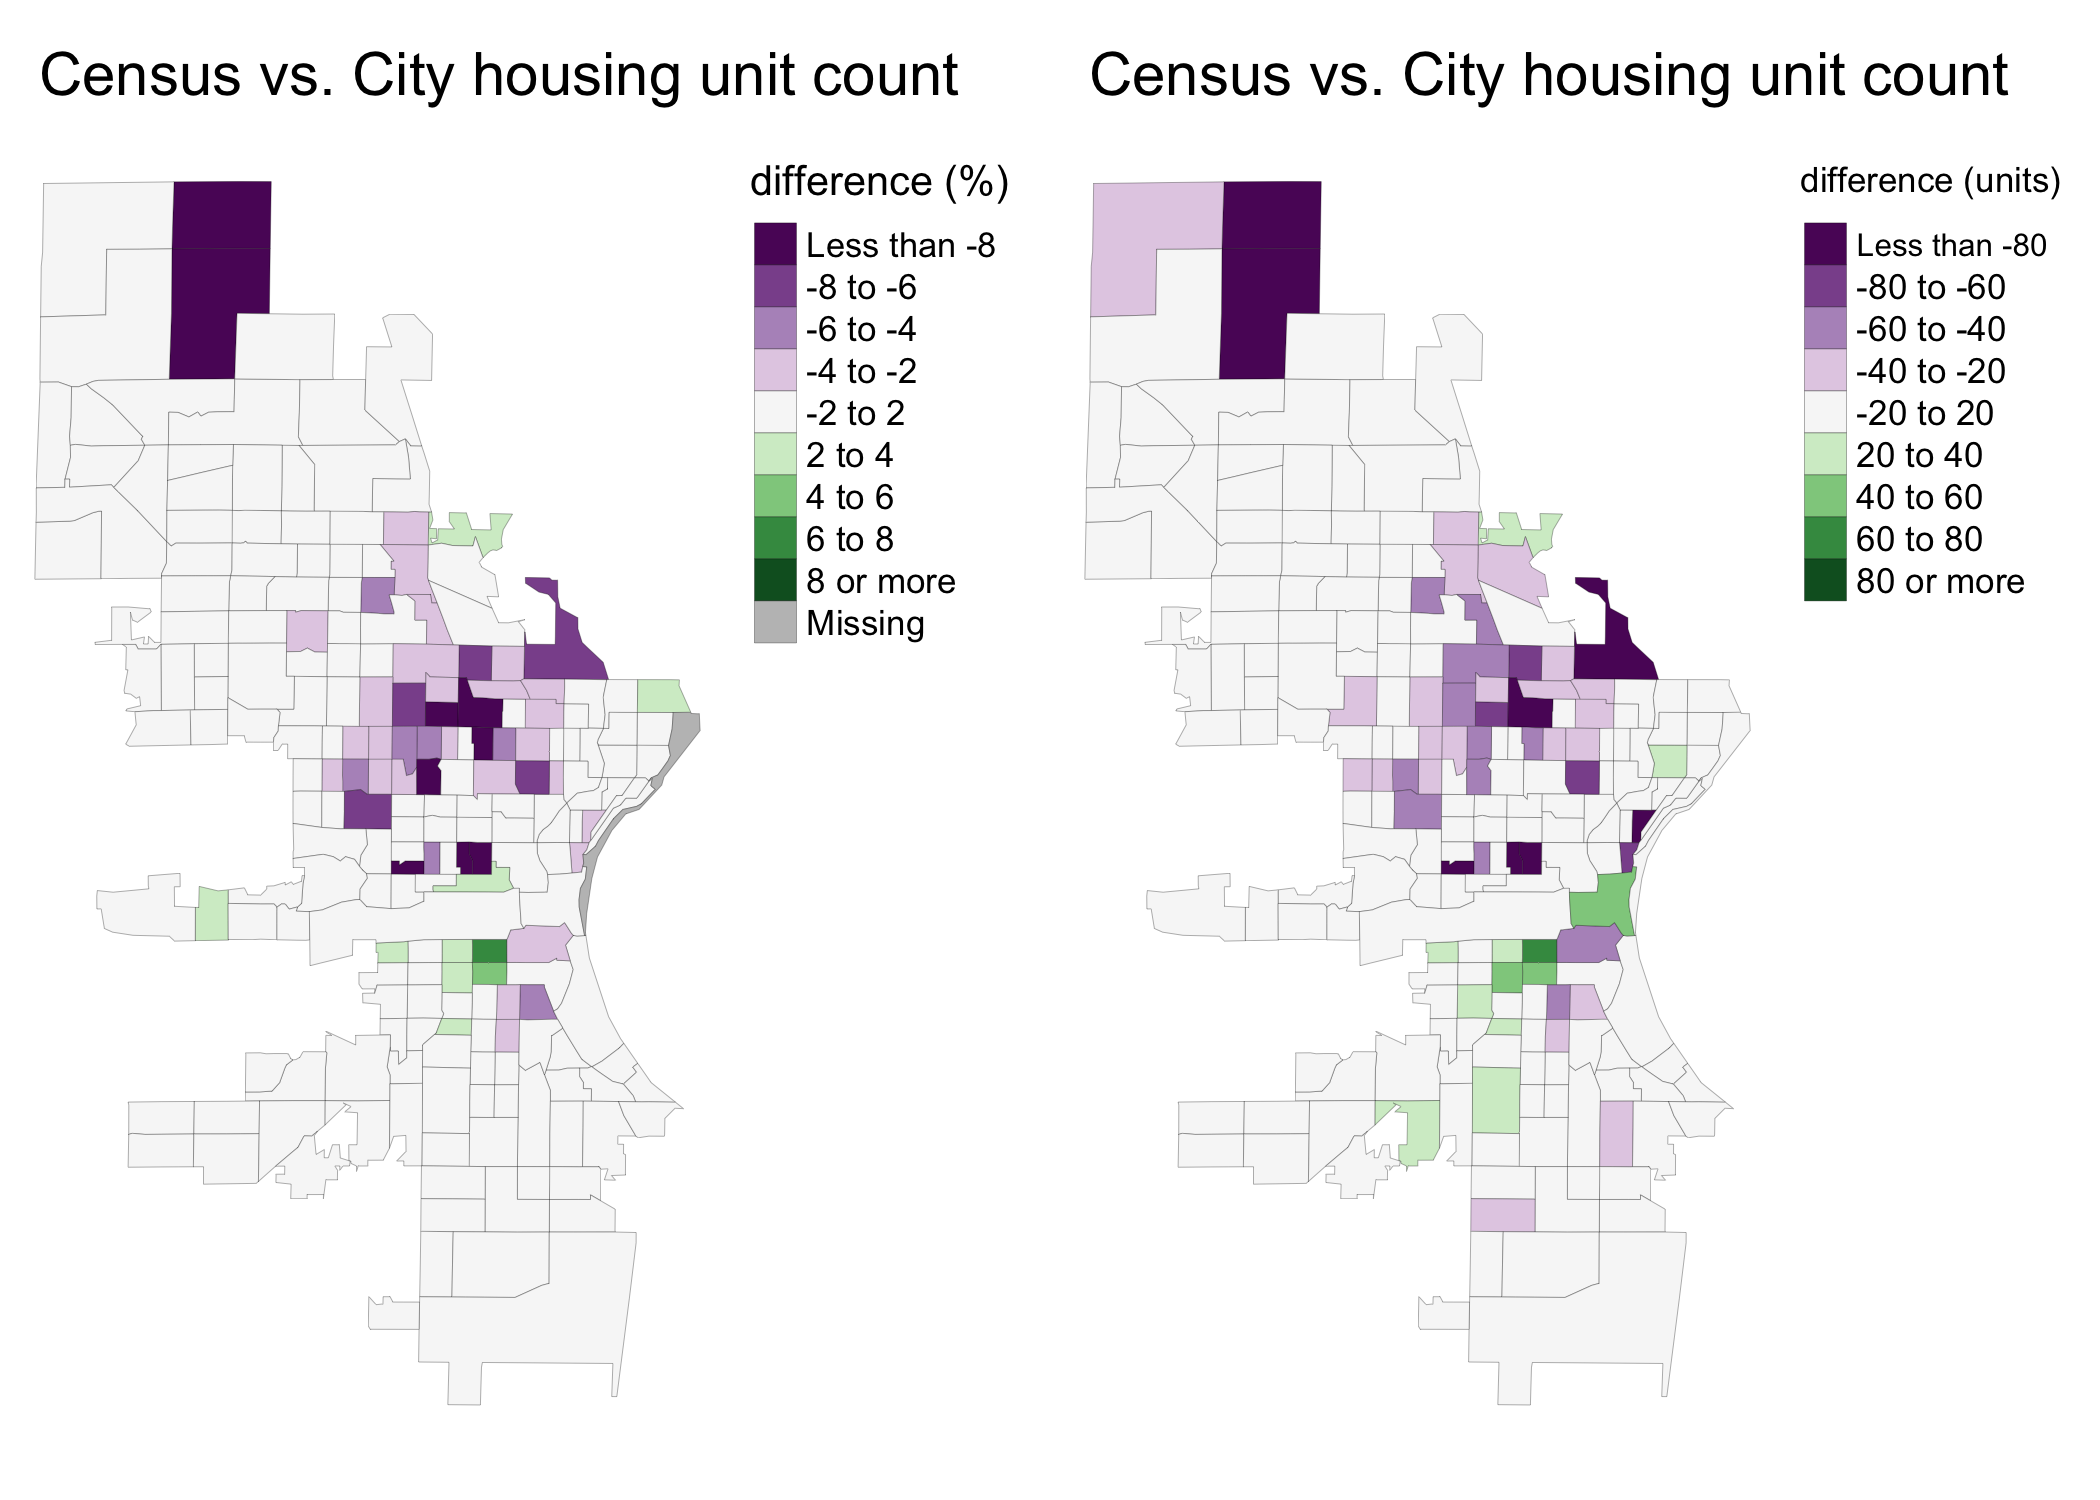 This image contains two maps comparing the difference in census and city housing unit counts at the tract level. The left map shows percentage difference. The right map shows raw numerical difference.